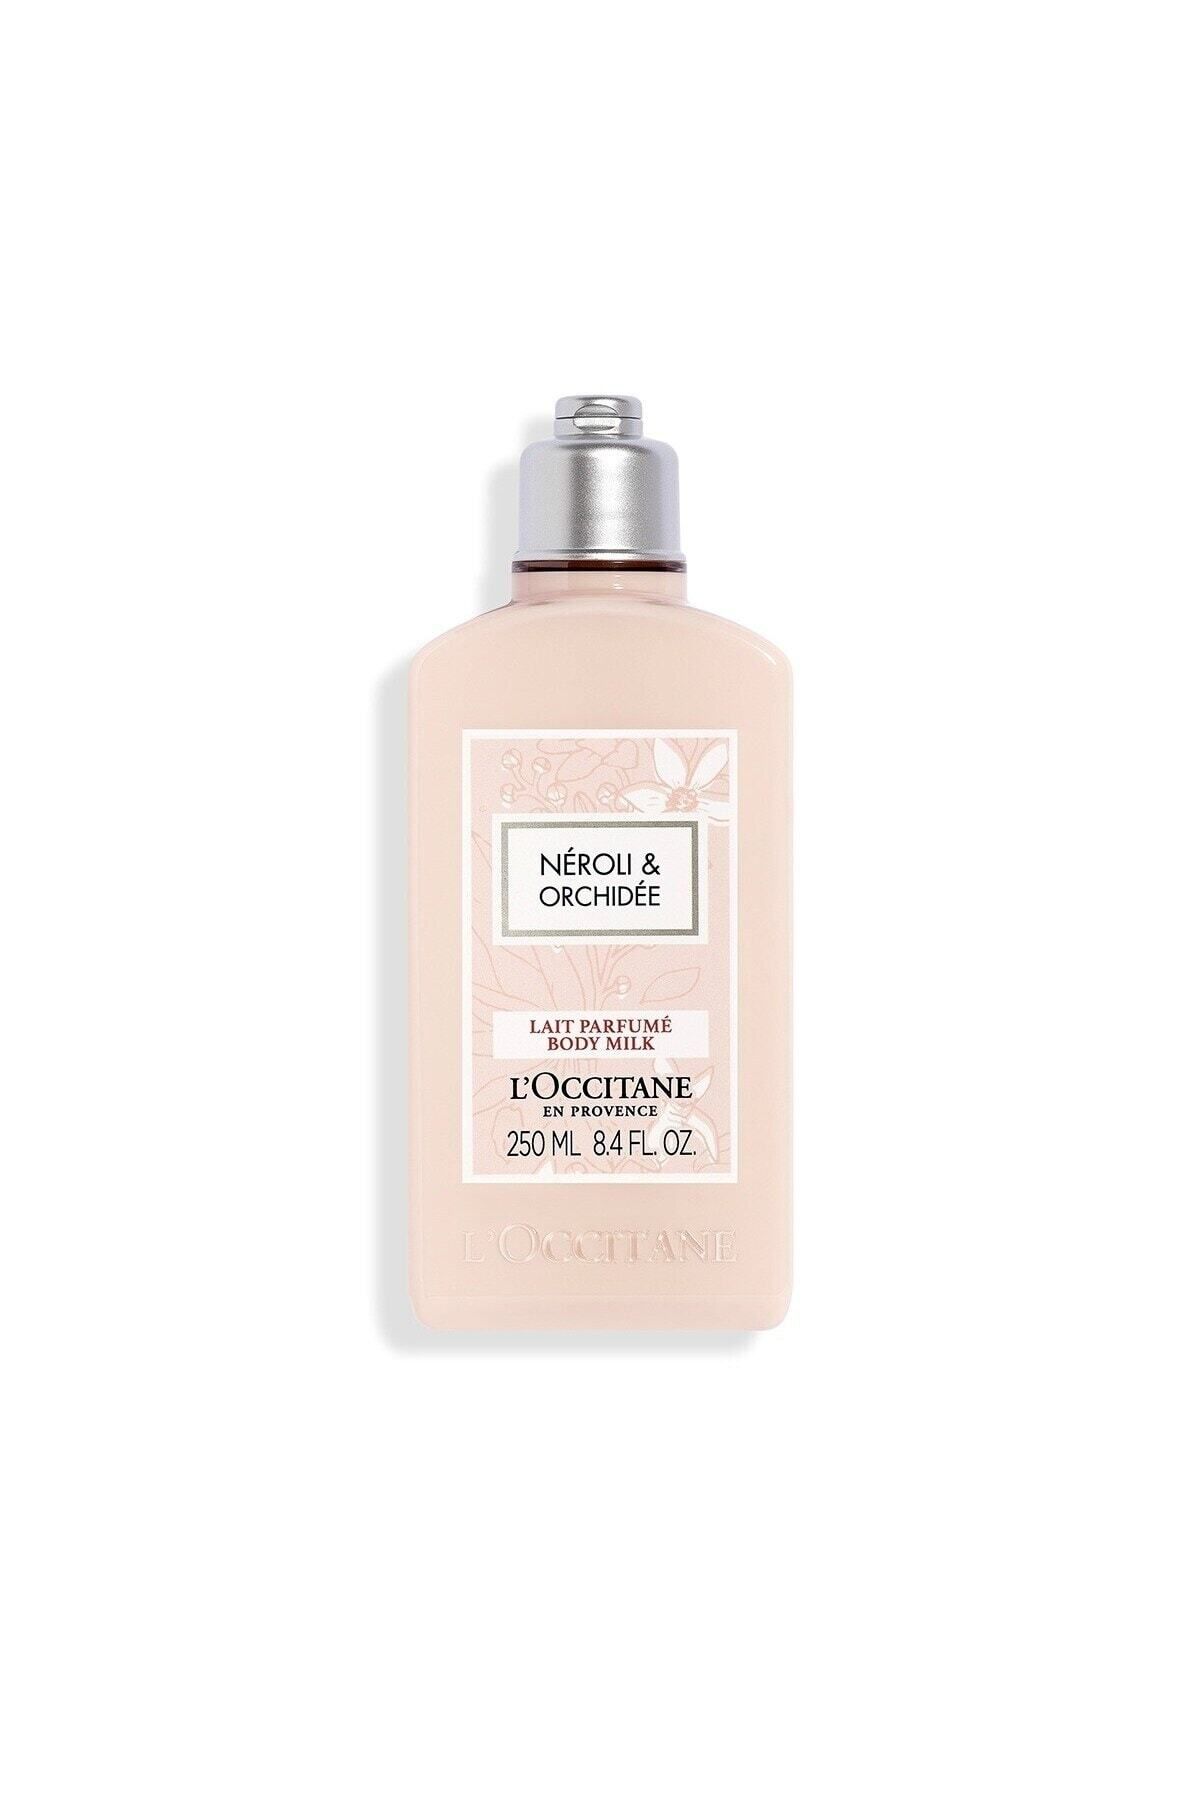 L'Occitane NÉROLİ & ORCHİDÉE- SMOOTHING ORANGE BLOSSOM & ORCHİD BODY LOTİON 250ML DEMBA2700